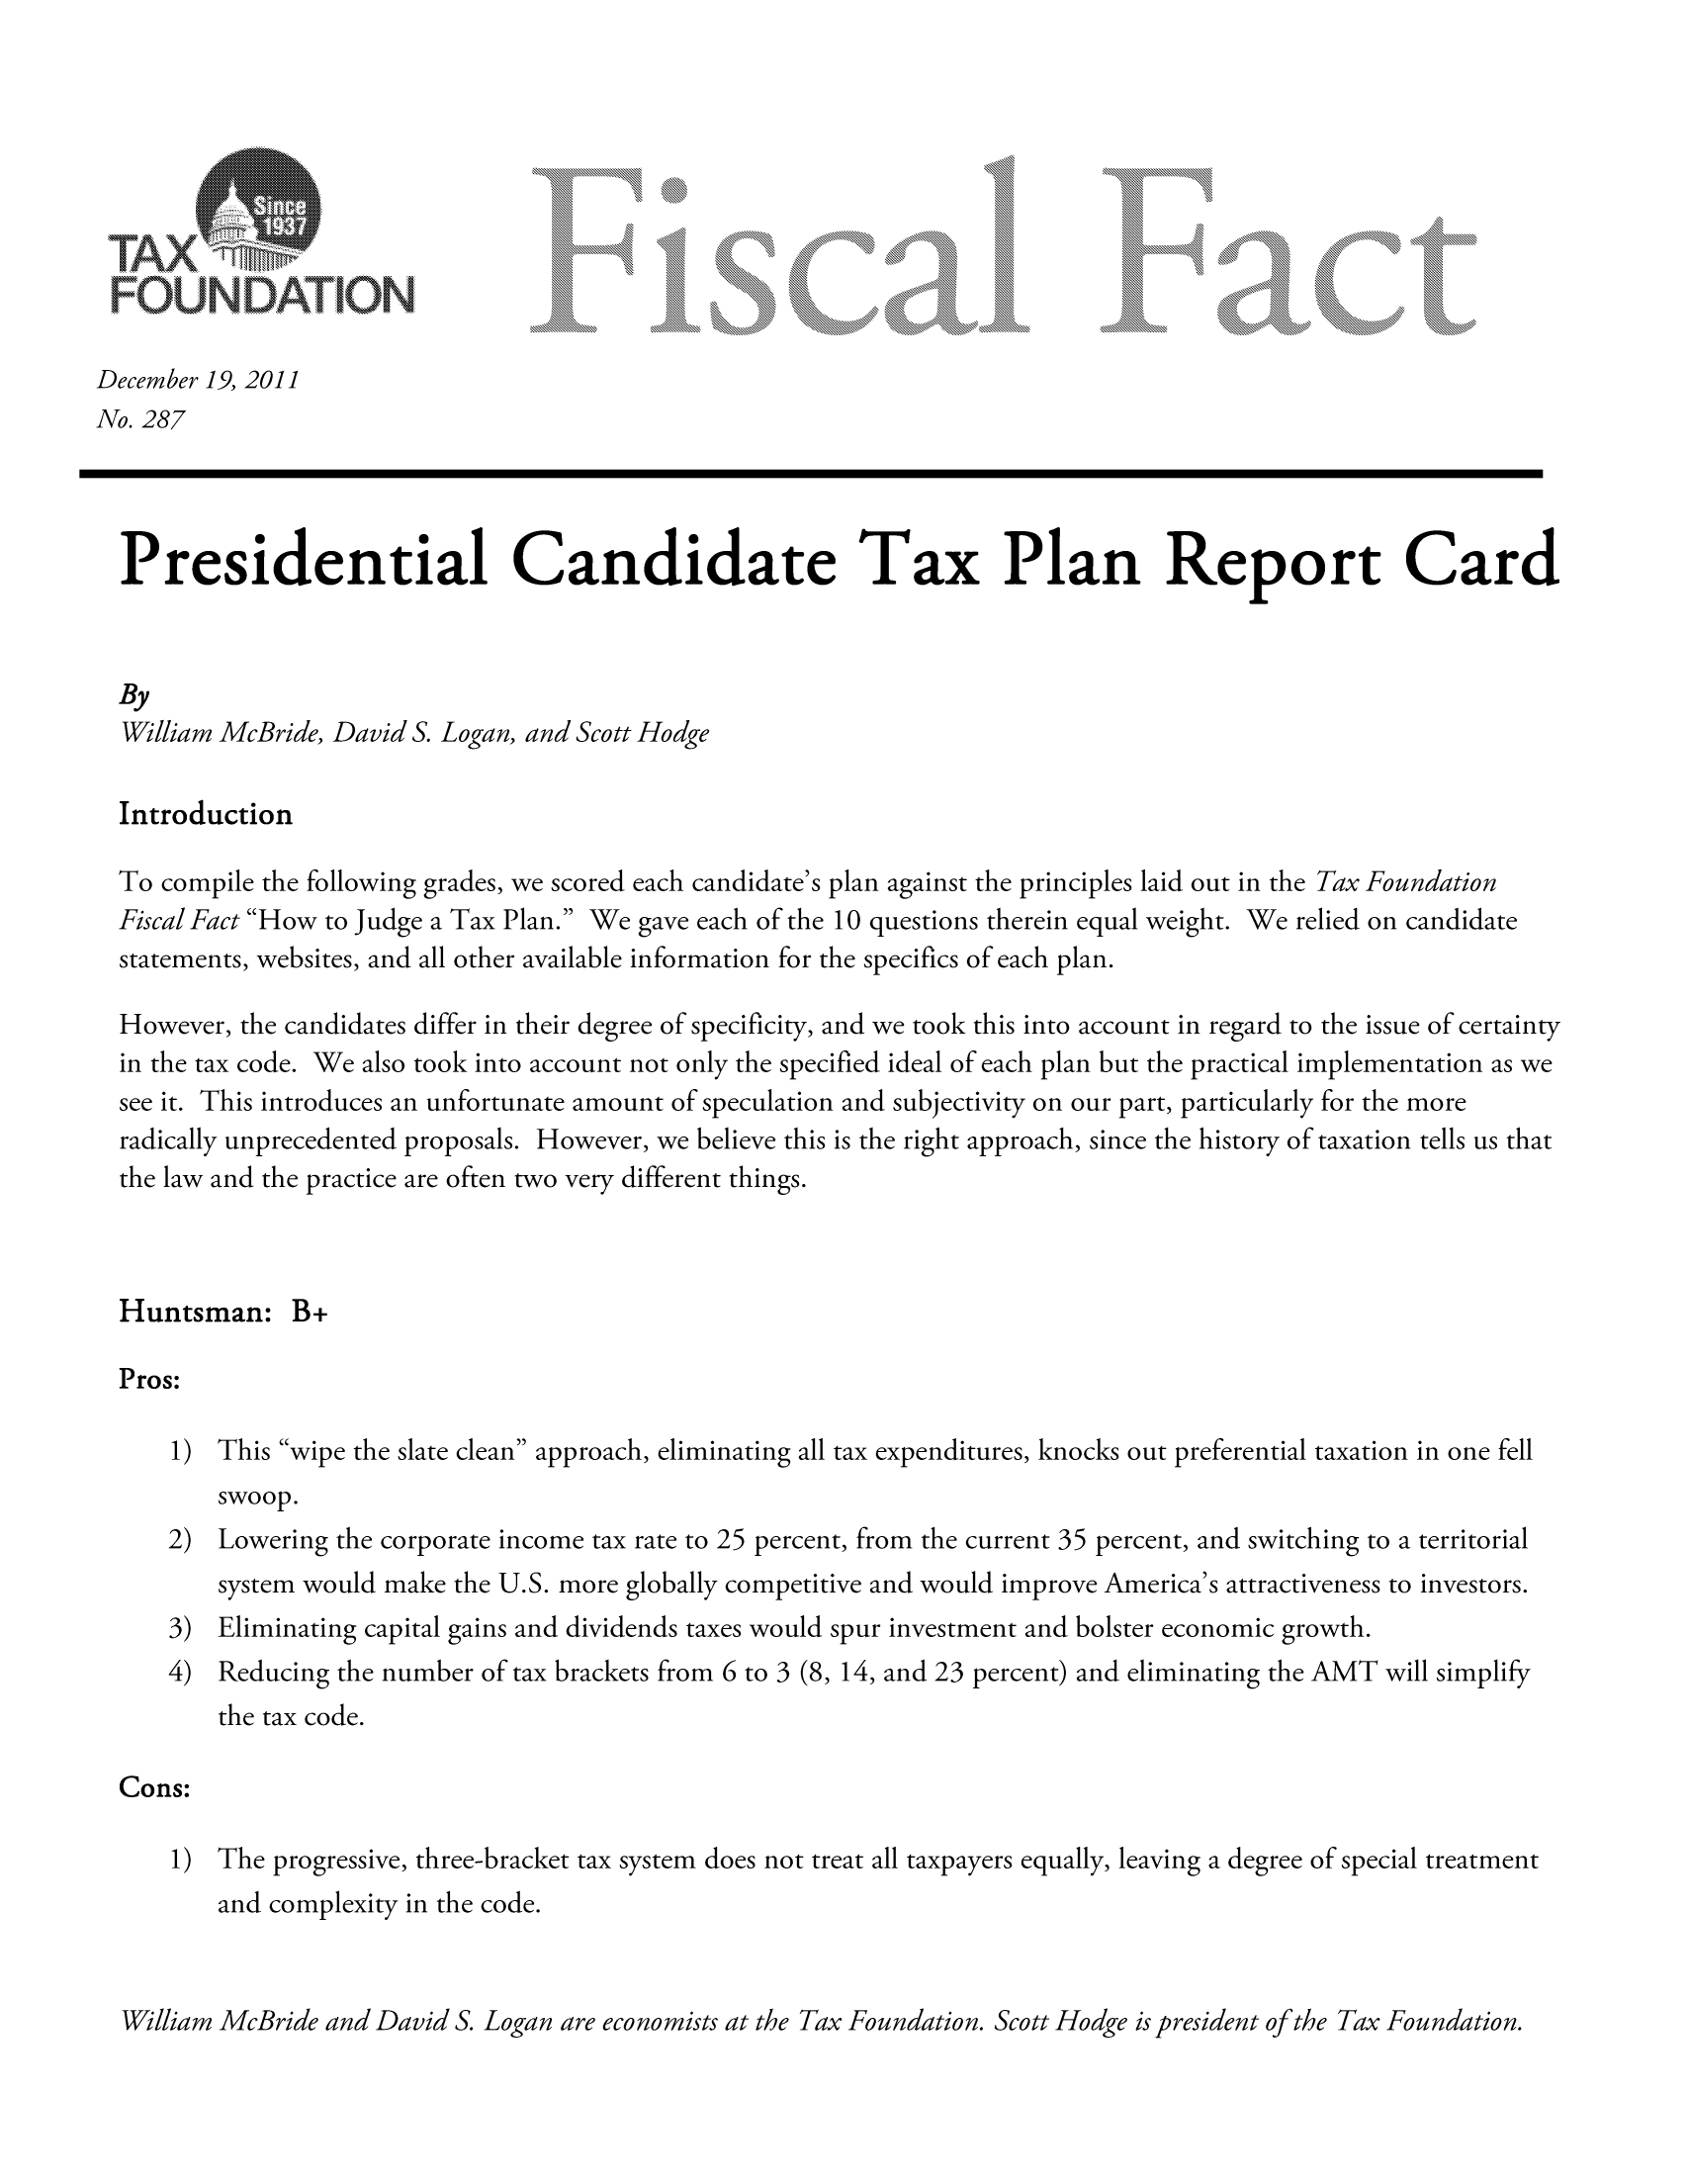 handle is hein.taxfoundation/ffcihxz0001 and id is 1 raw text is: December 19, 2011
No. 287
Presidential Candidate Tax Plan Report Card
By
William McBride, David S. Logan, and Scott Hodge
Introduction
To compile the following grades, we scored each candidate's plan against the principles laid out in the Tax Foundation
Fiscal Fact How to Judge a Tax Plan. We gave each of the 10 questions therein equal weight. We relied on candidate
statements, websites, and all other available information for the specifics of each plan.
However, the candidates differ in their degree of specificity, and we took this into account in regard to the issue of certainty
in the tax code. We also took into account not only the specified ideal of each plan but the practical implementation as we
see it. This introduces an unfortunate amount of speculation and subjectivity on our part, particularly for the more
radically unprecedented proposals. However, we believe this is the right approach, since the history of taxation tells us that
the law and the practice are often two very different things.
Huntsman: B+
Pros:
1) This wipe the slate clean approach, eliminating all tax expenditures, knocks out preferential taxation in one fell
swoop.
2) Lowering the corporate income tax rate to 25 percent, from the current 35 percent, and switching to a territorial
system would make the U.S. more globally competitive and would improve America's attractiveness to investors.
3) Eliminating capital gains and dividends taxes would spur investment and bolster economic growth.
4) Reducing the number of tax brackets from 6 to 3 (8, 14, and 23 percent) and eliminating the AMT will simplify
the tax code.
Cons:
1) The progressive, three-bracket tax system does not treat all taxpayers equally, leaving a degree of special treatment
and complexity in the code.
ll1iam McBride and David S. Logan are economists at the Tax Foundation. Scott Hodge is president of the Tax Foundation.


